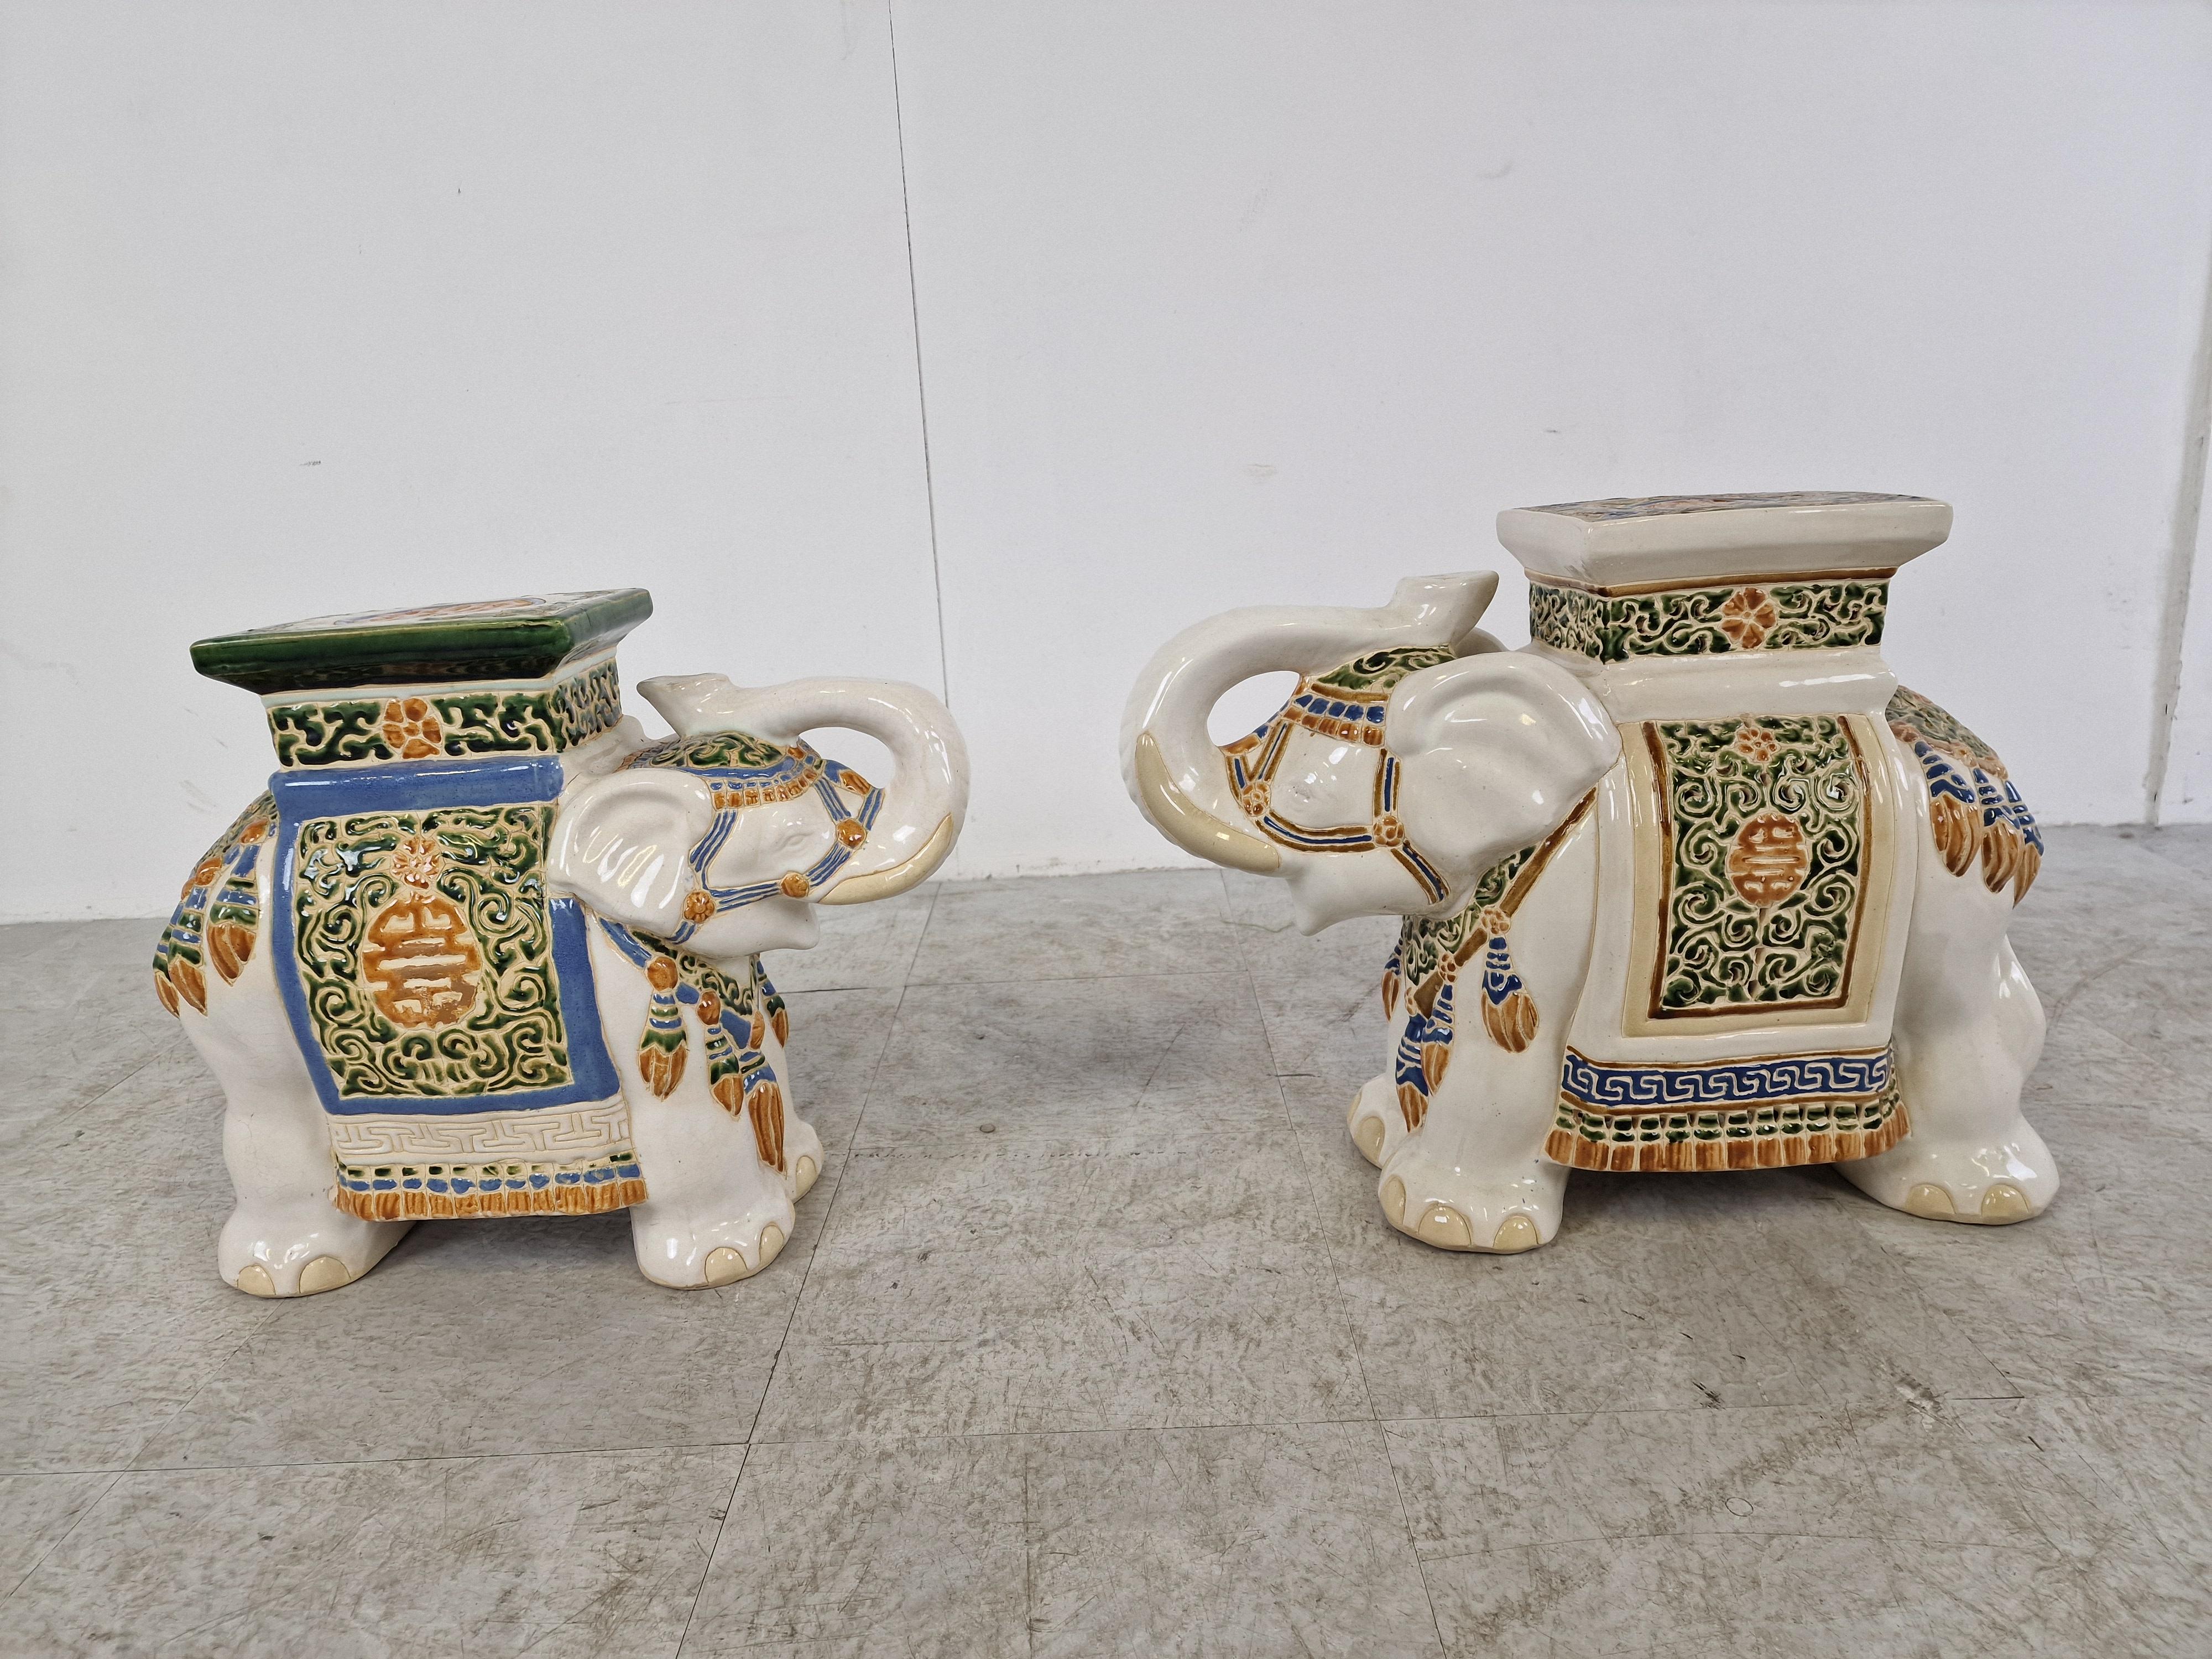 Vintage Hollywood Regency Chinese Elephant Plant Stands, set of 2 - 1960s 1